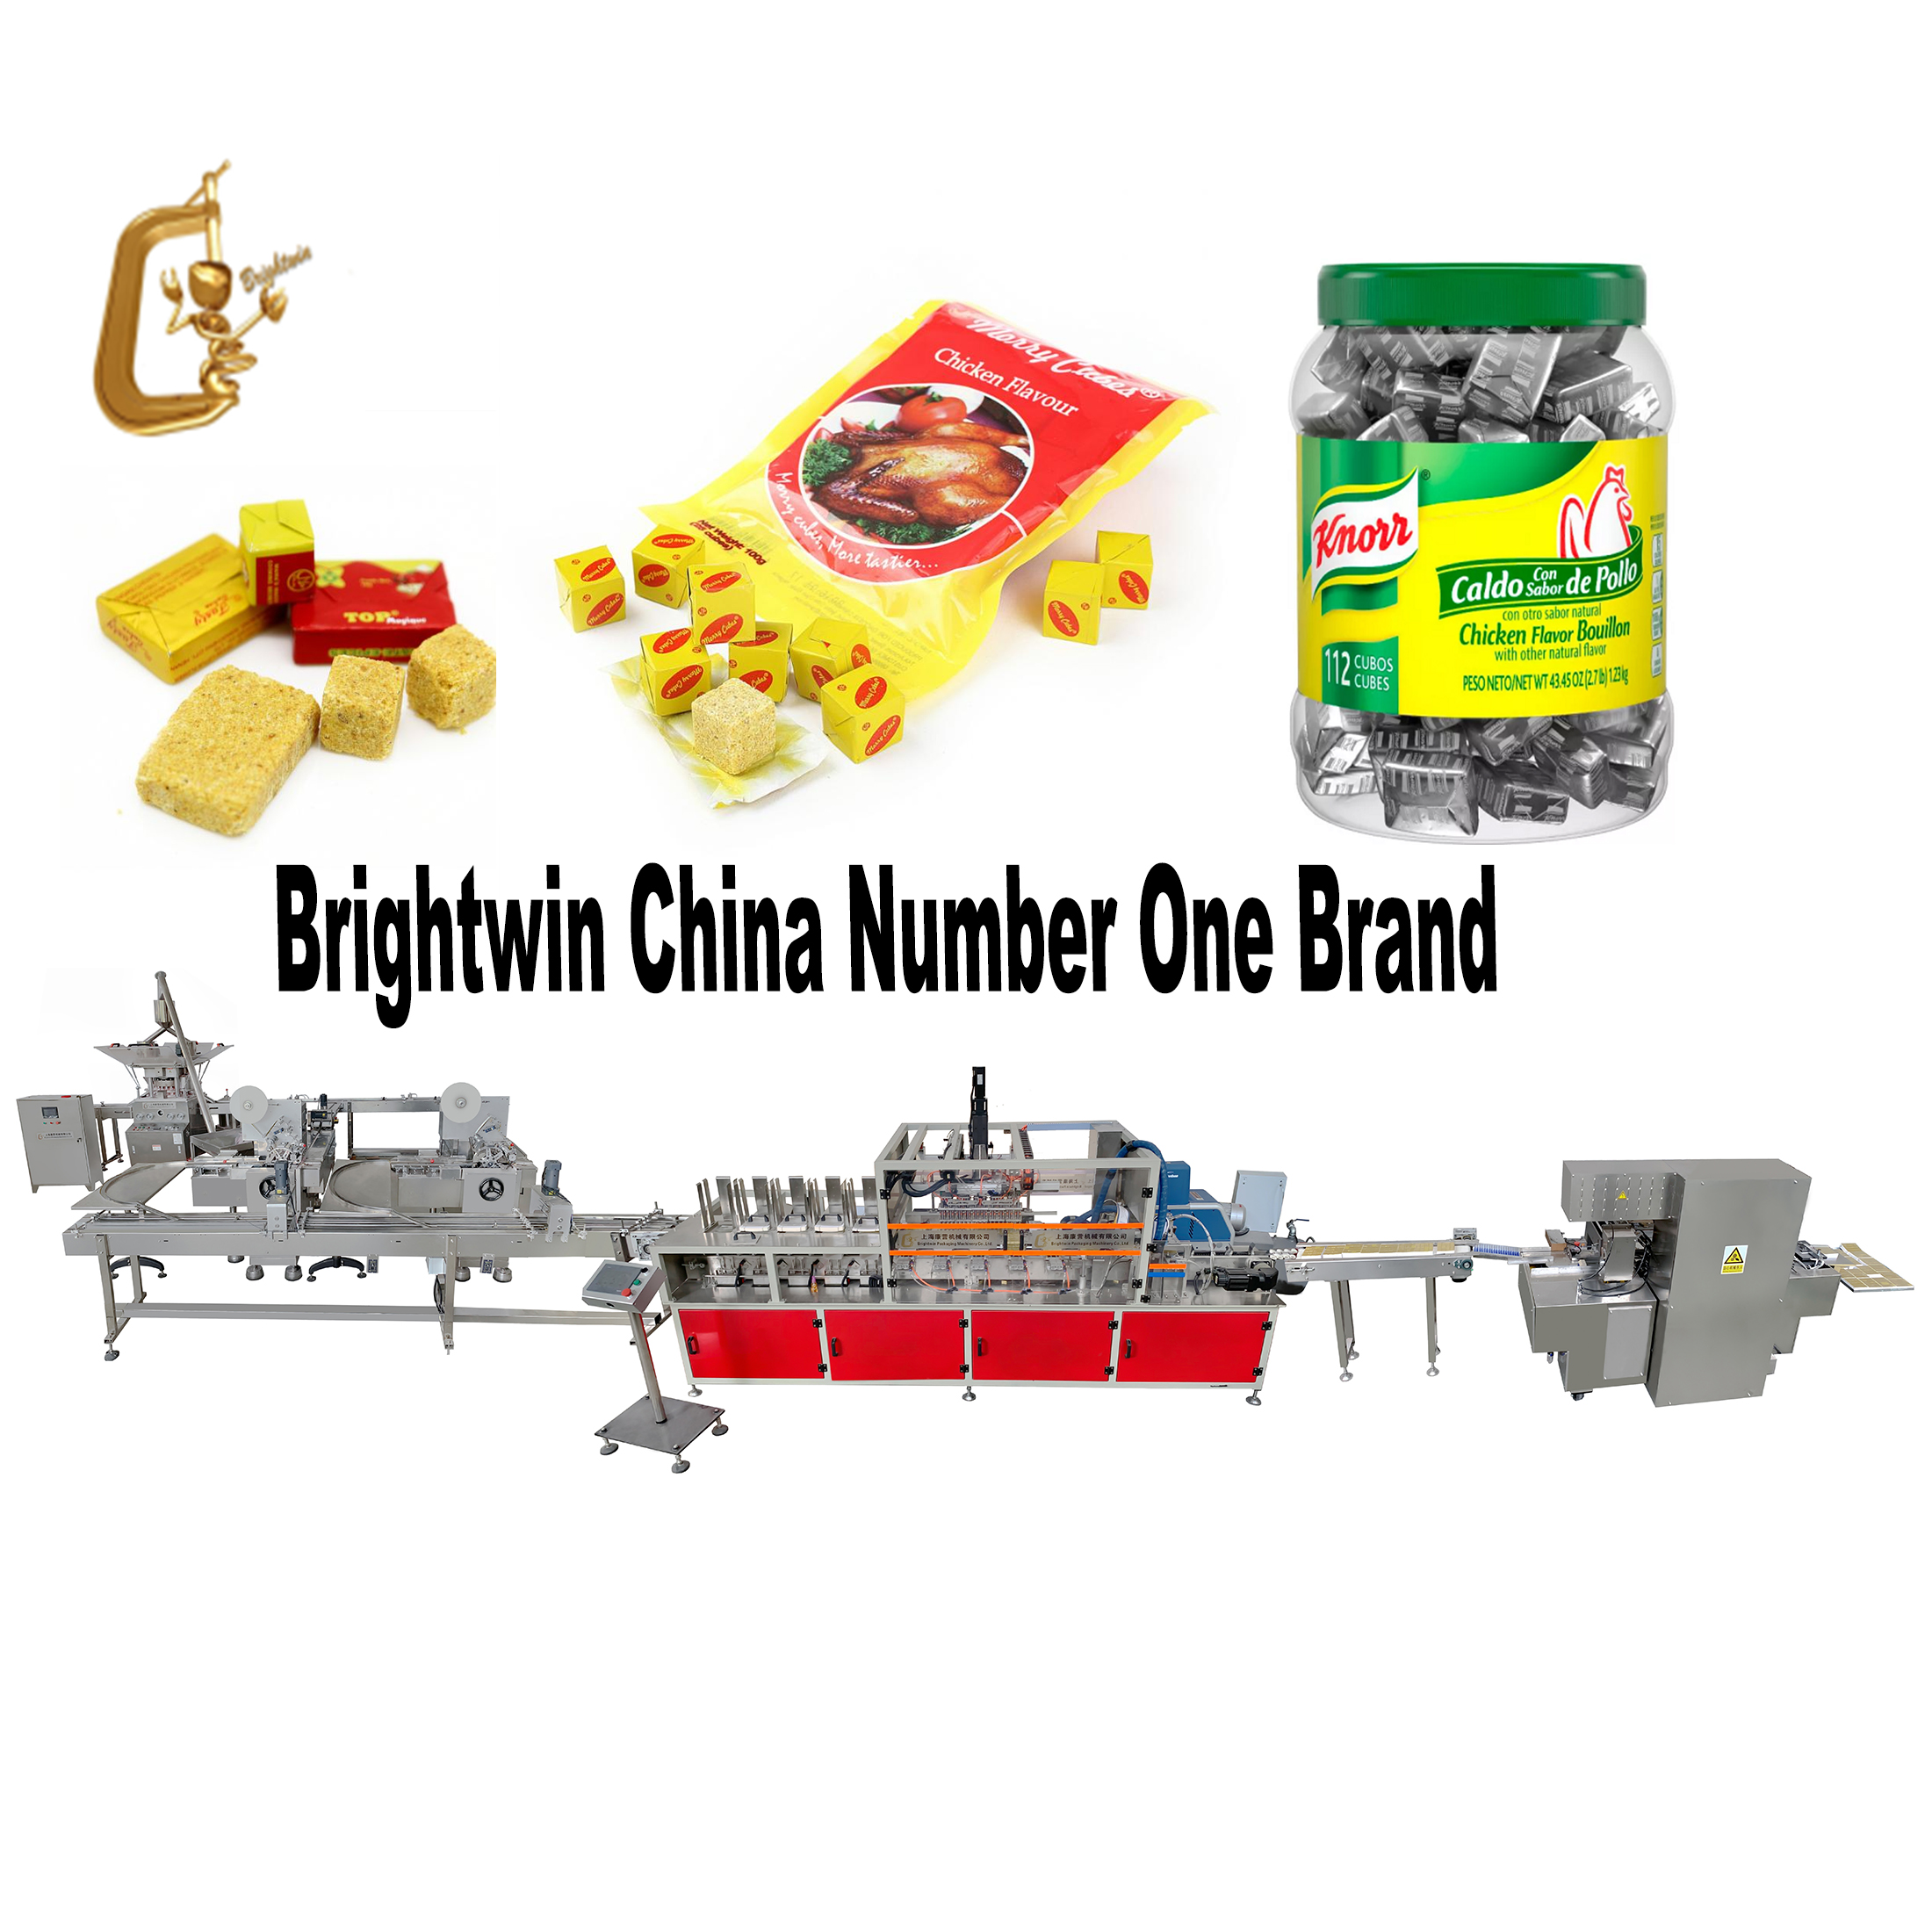 Brightwin Factory Directly Sale Automatic Beef Flavor Pressing Machine Bouillon Seasoning Chicken Stock Tablets Cube Soup Cubes 4g 10g 12g Pressing Wrapping Boxing Packing Processing Equipment Machine Featured Image